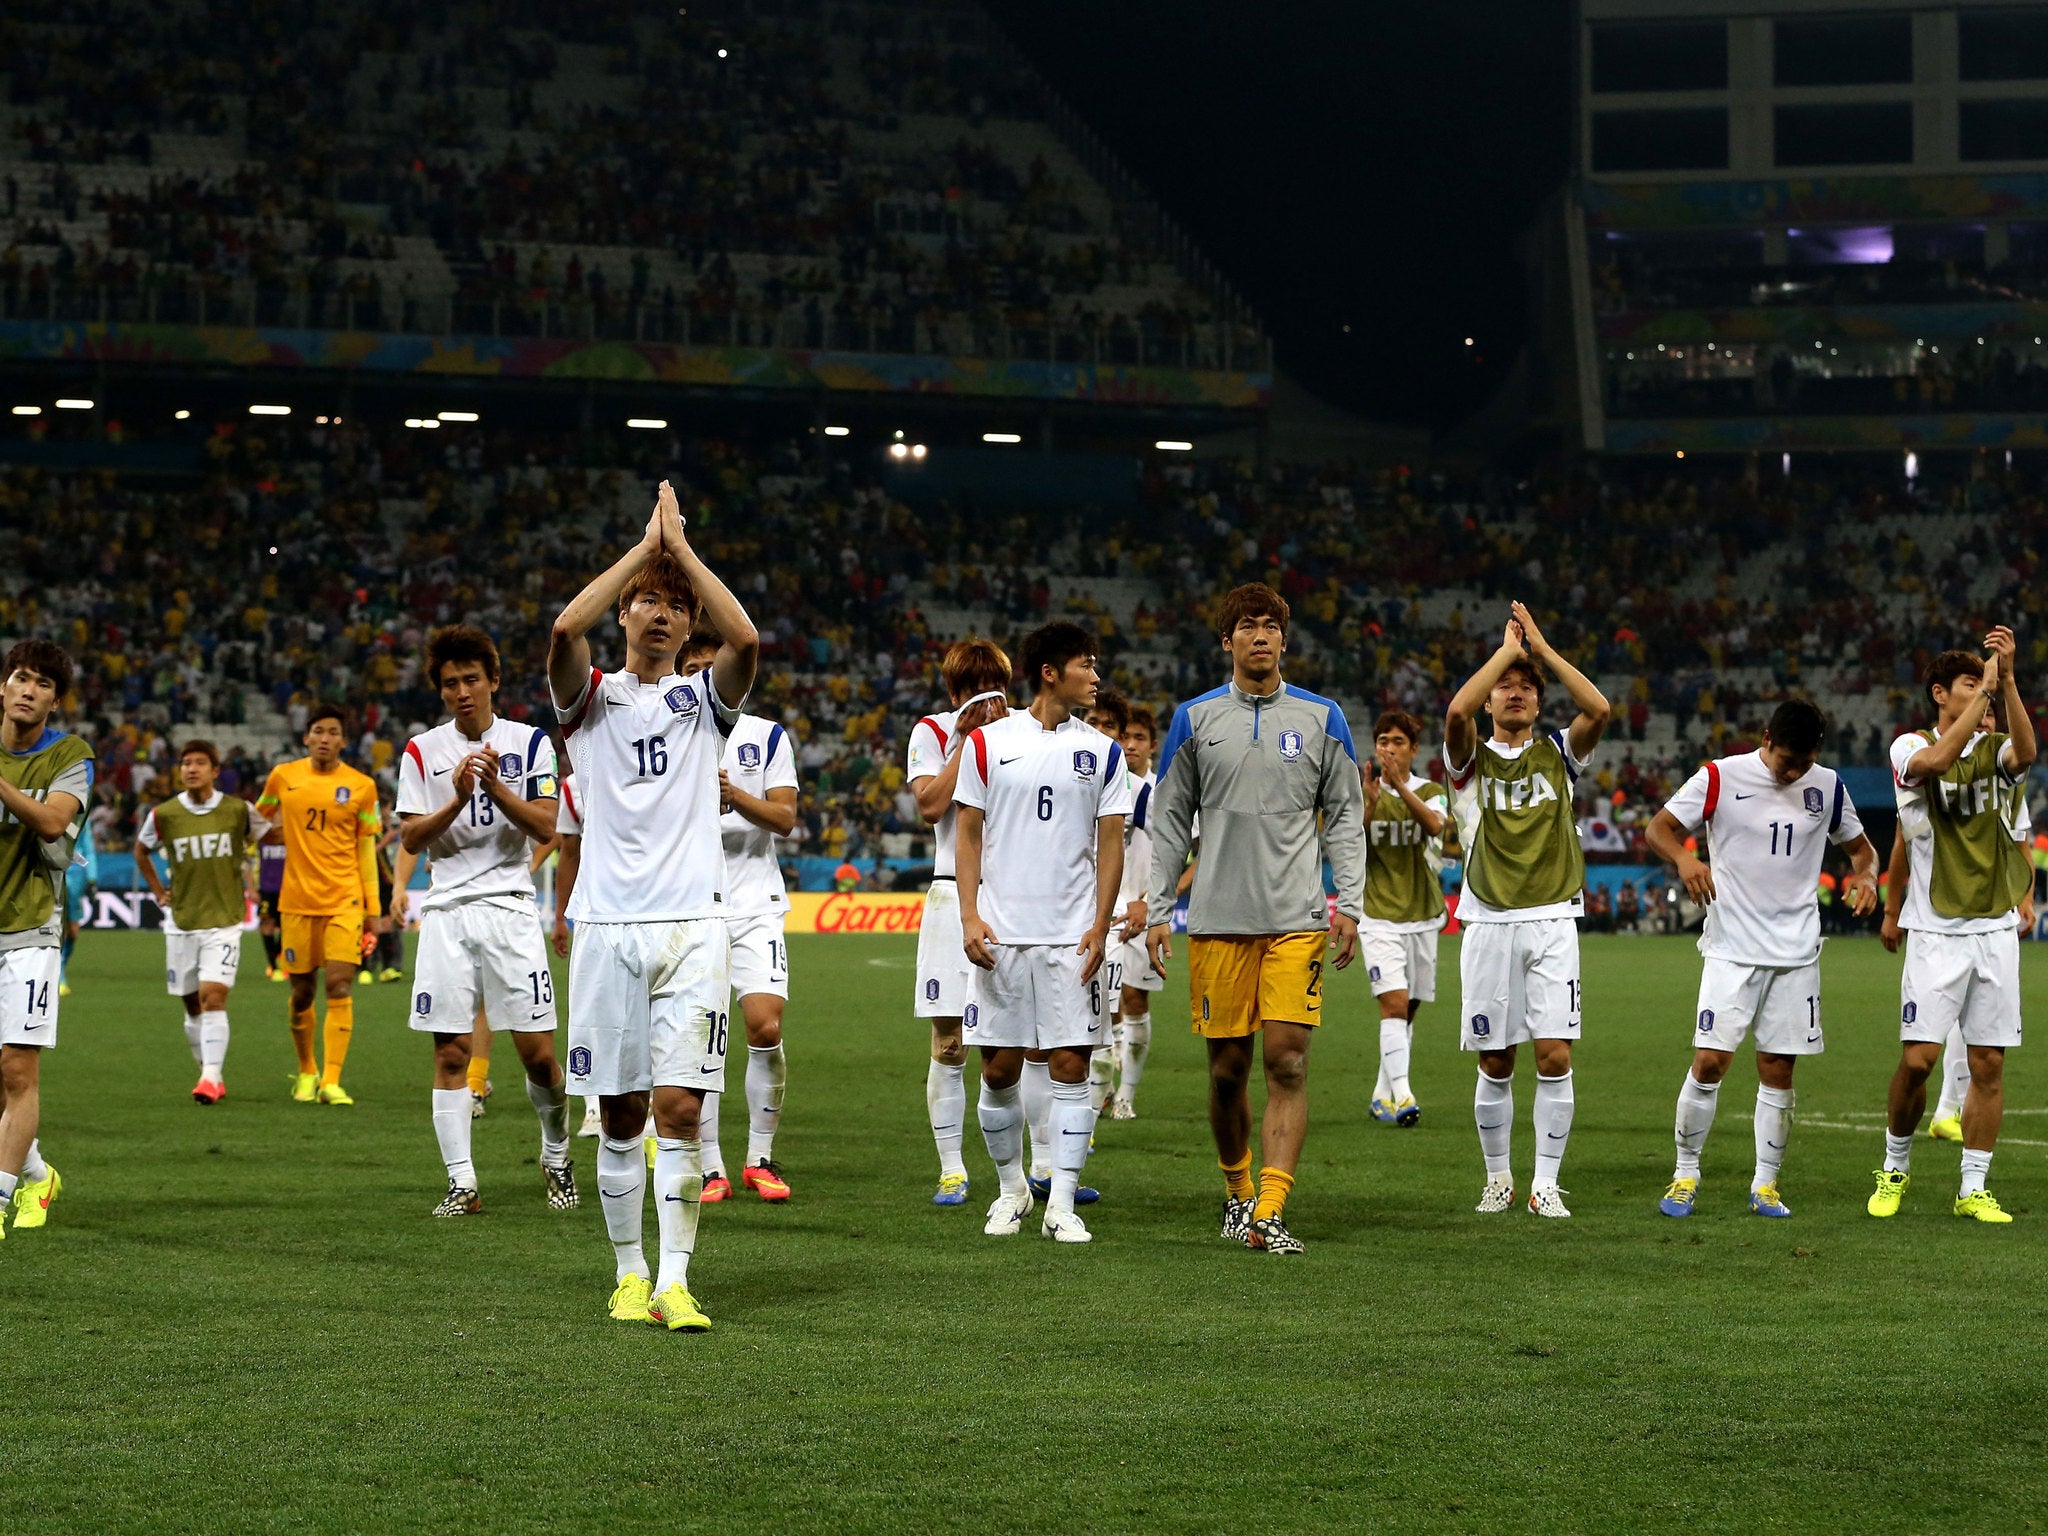 Ki Sung-Yueng of South Korea and teammates acknowledge the fans after a 0-1 defeat to Belgium in the 2014 FIFA World Cup Brazil Group H match between South Korea and Belgium at Arena de Sao Paulo on June 26, 2014 in Sao Paulo, Brazil.